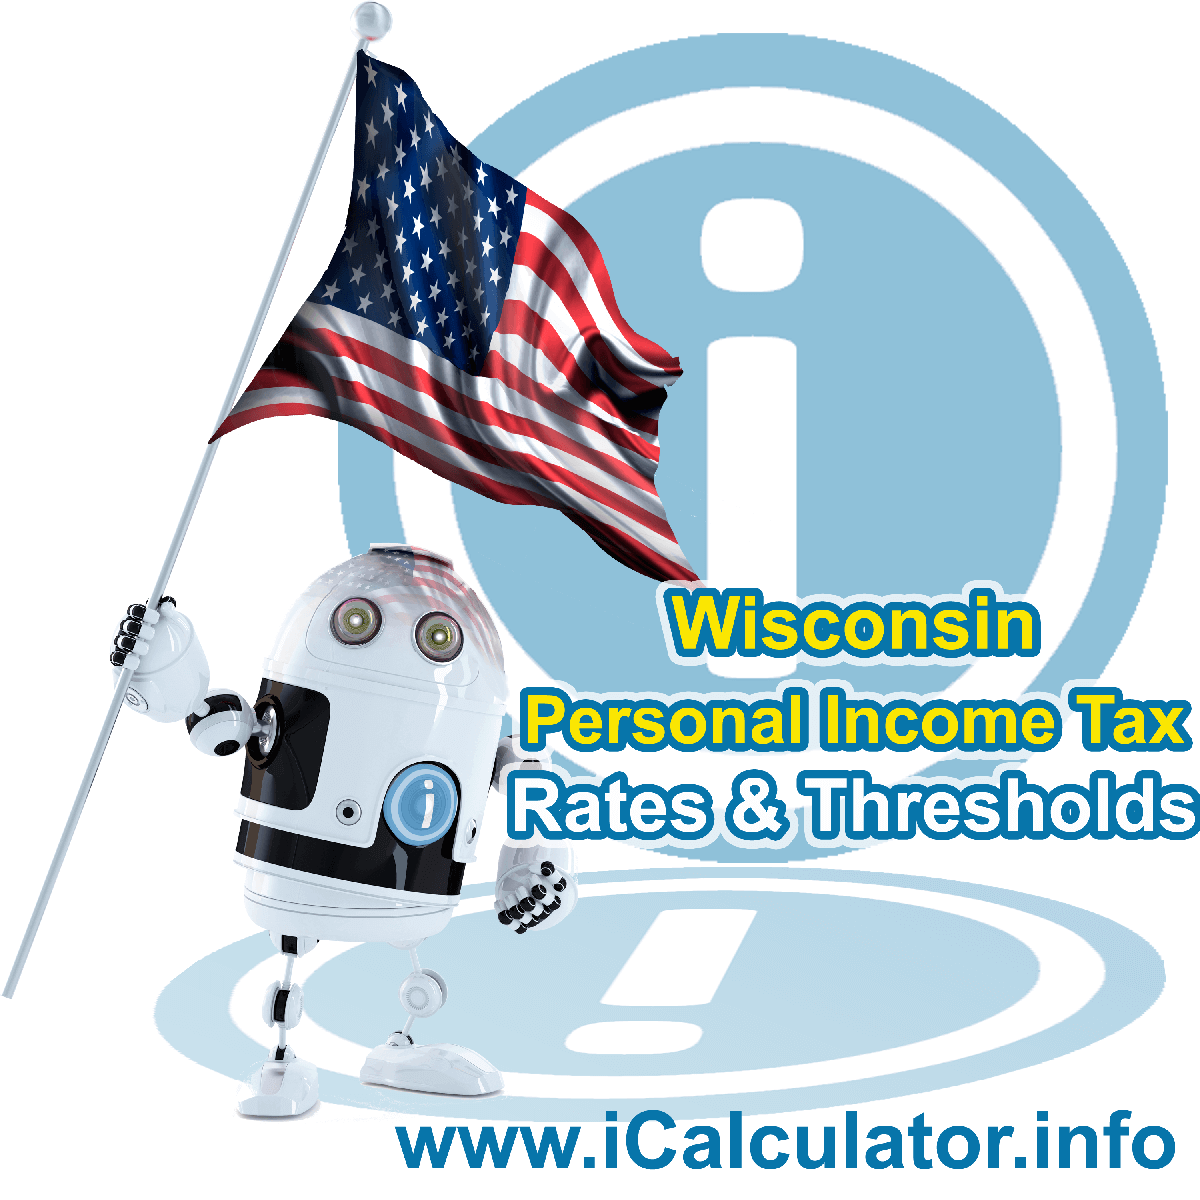 Wisconsin State Tax Tables 2023. This image displays details of the Wisconsin State Tax Tables for the 2023 tax return year which is provided in support of the 2023 US Tax Calculator